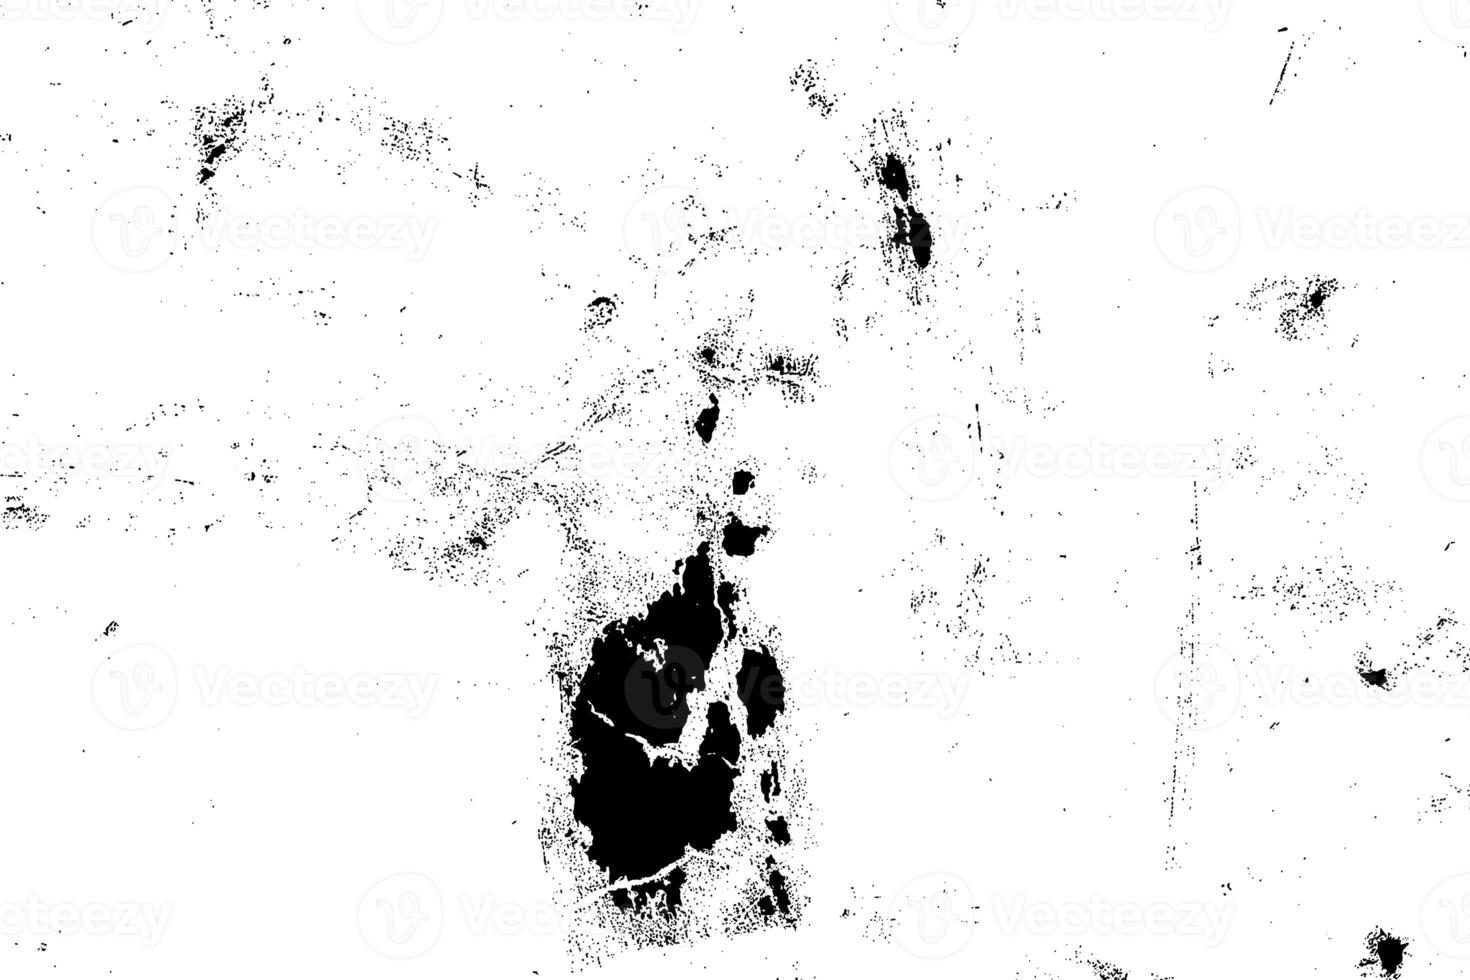 Grain monochrome pattern of the old worn surface design. Distress Overlay Texture Grunge background of black and white. photo